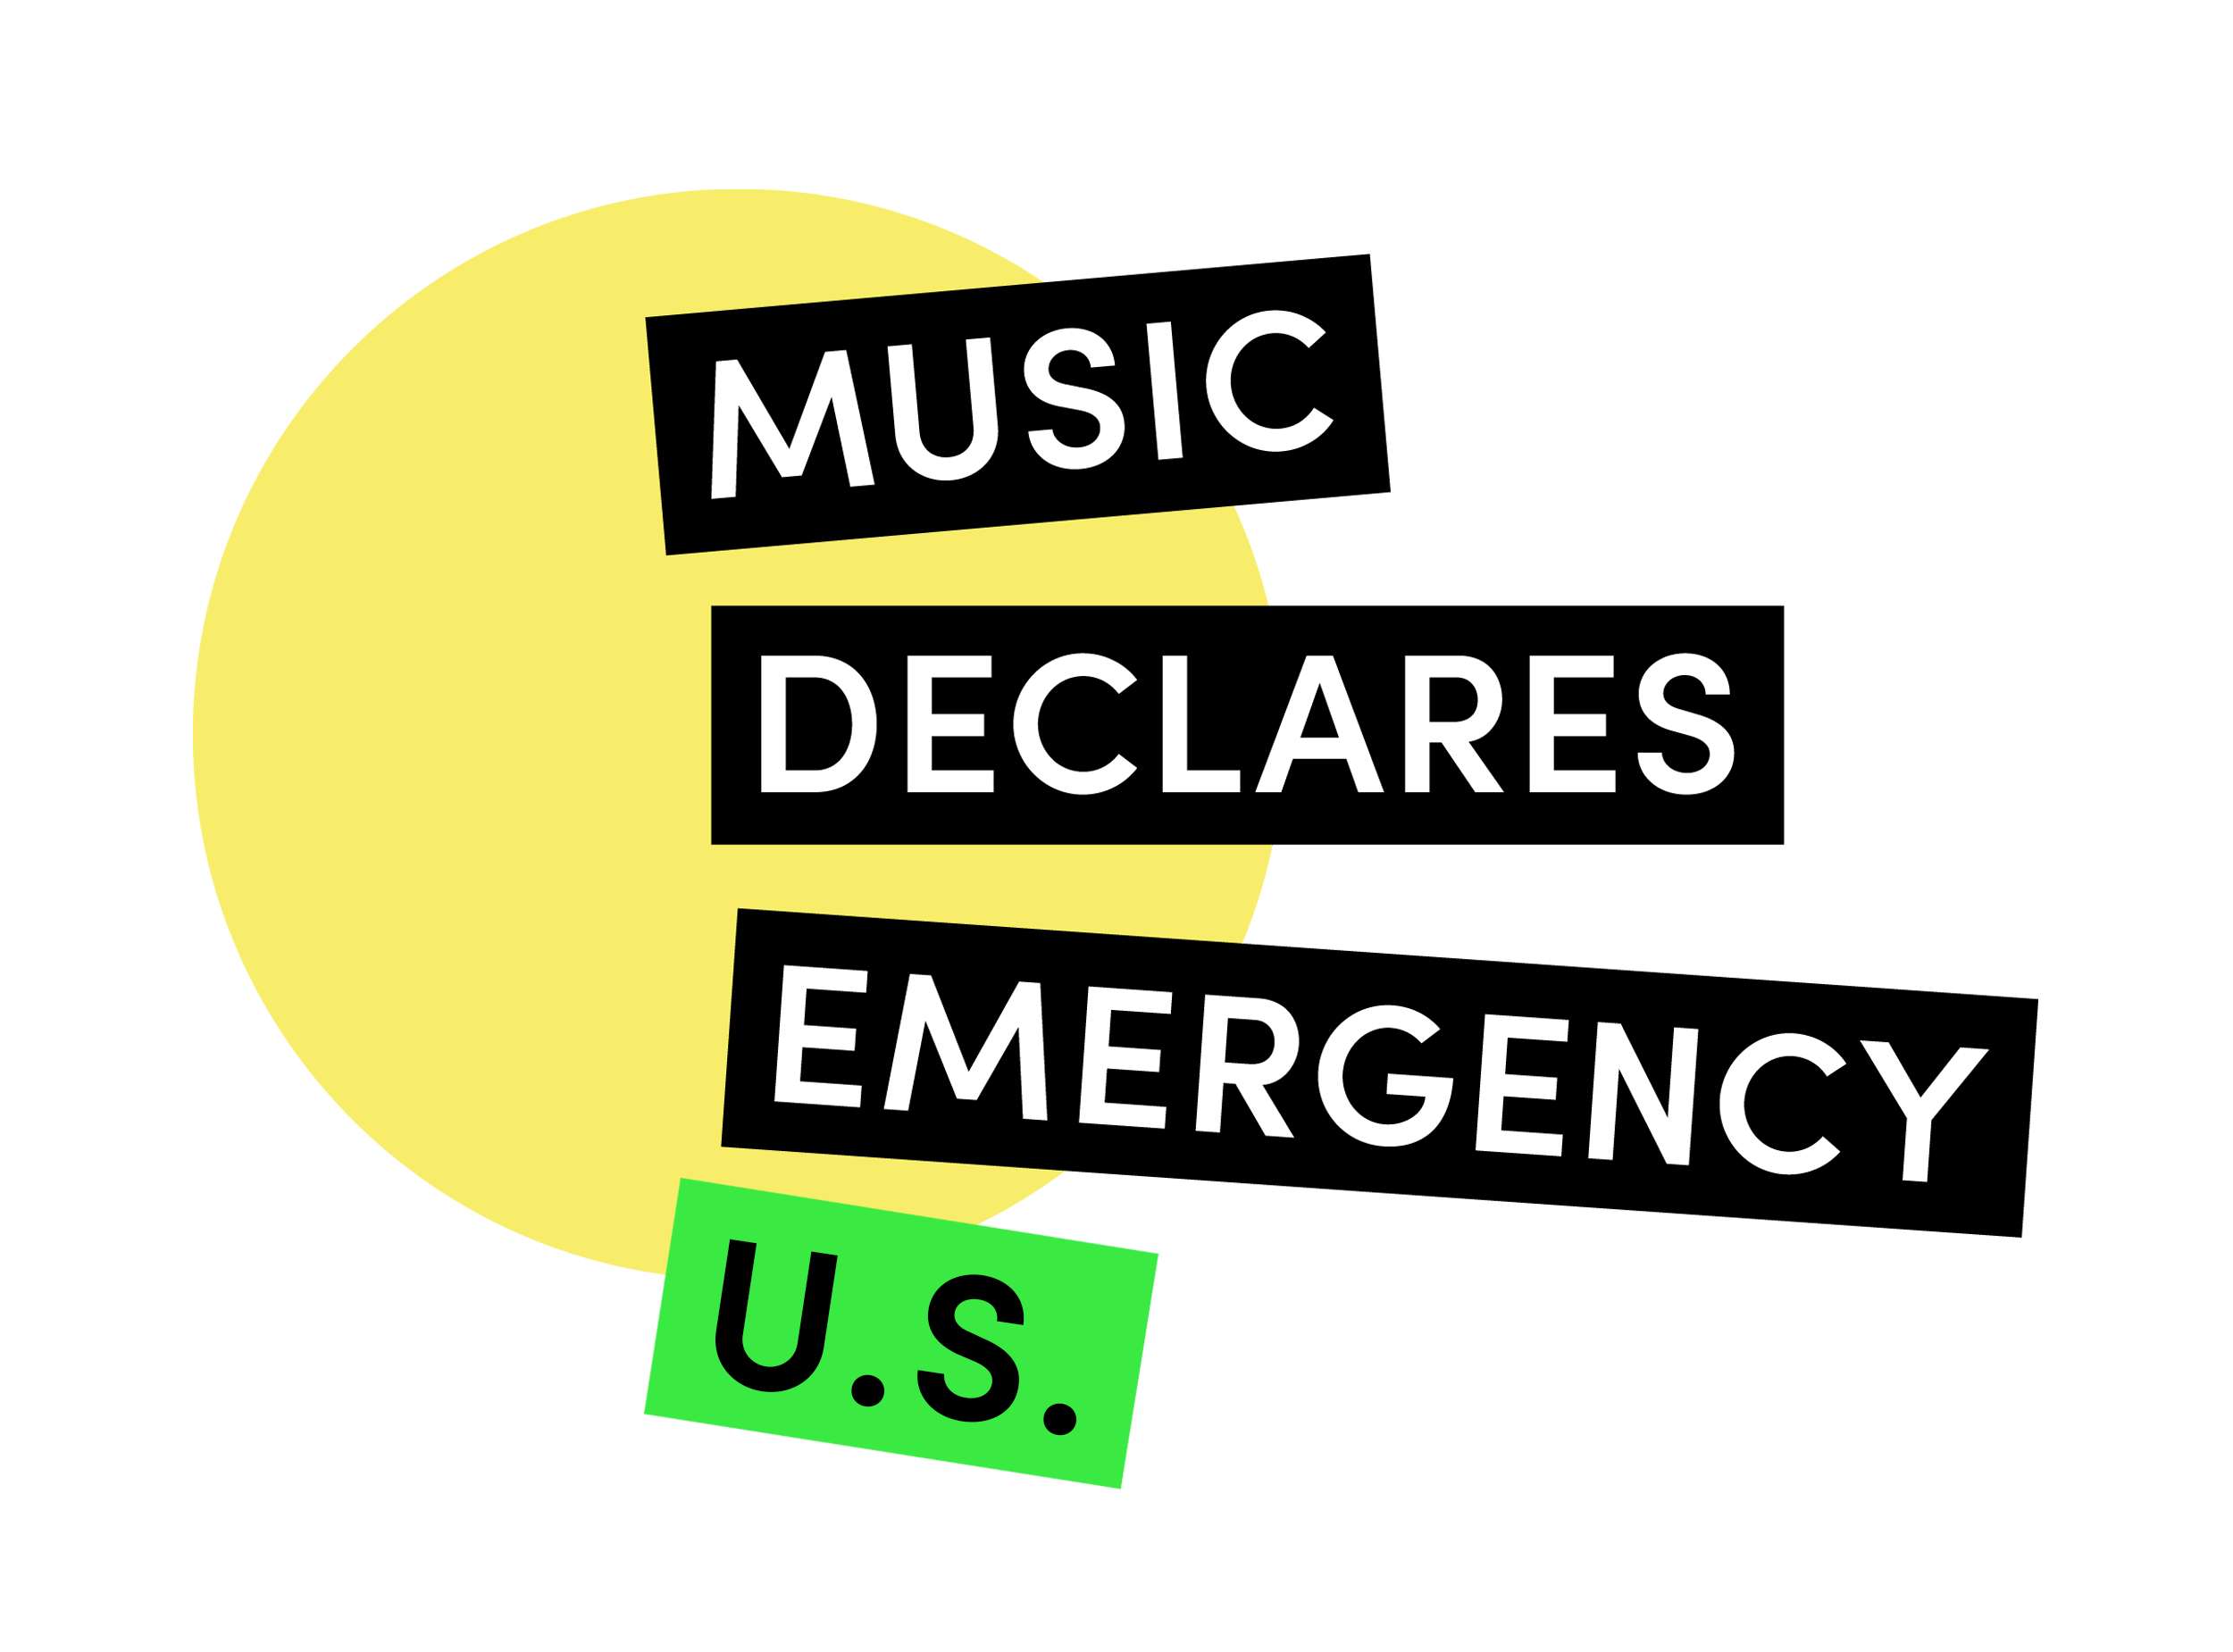 https://www.musicdeclares.net/assets/images/media/mde-us-hires.png